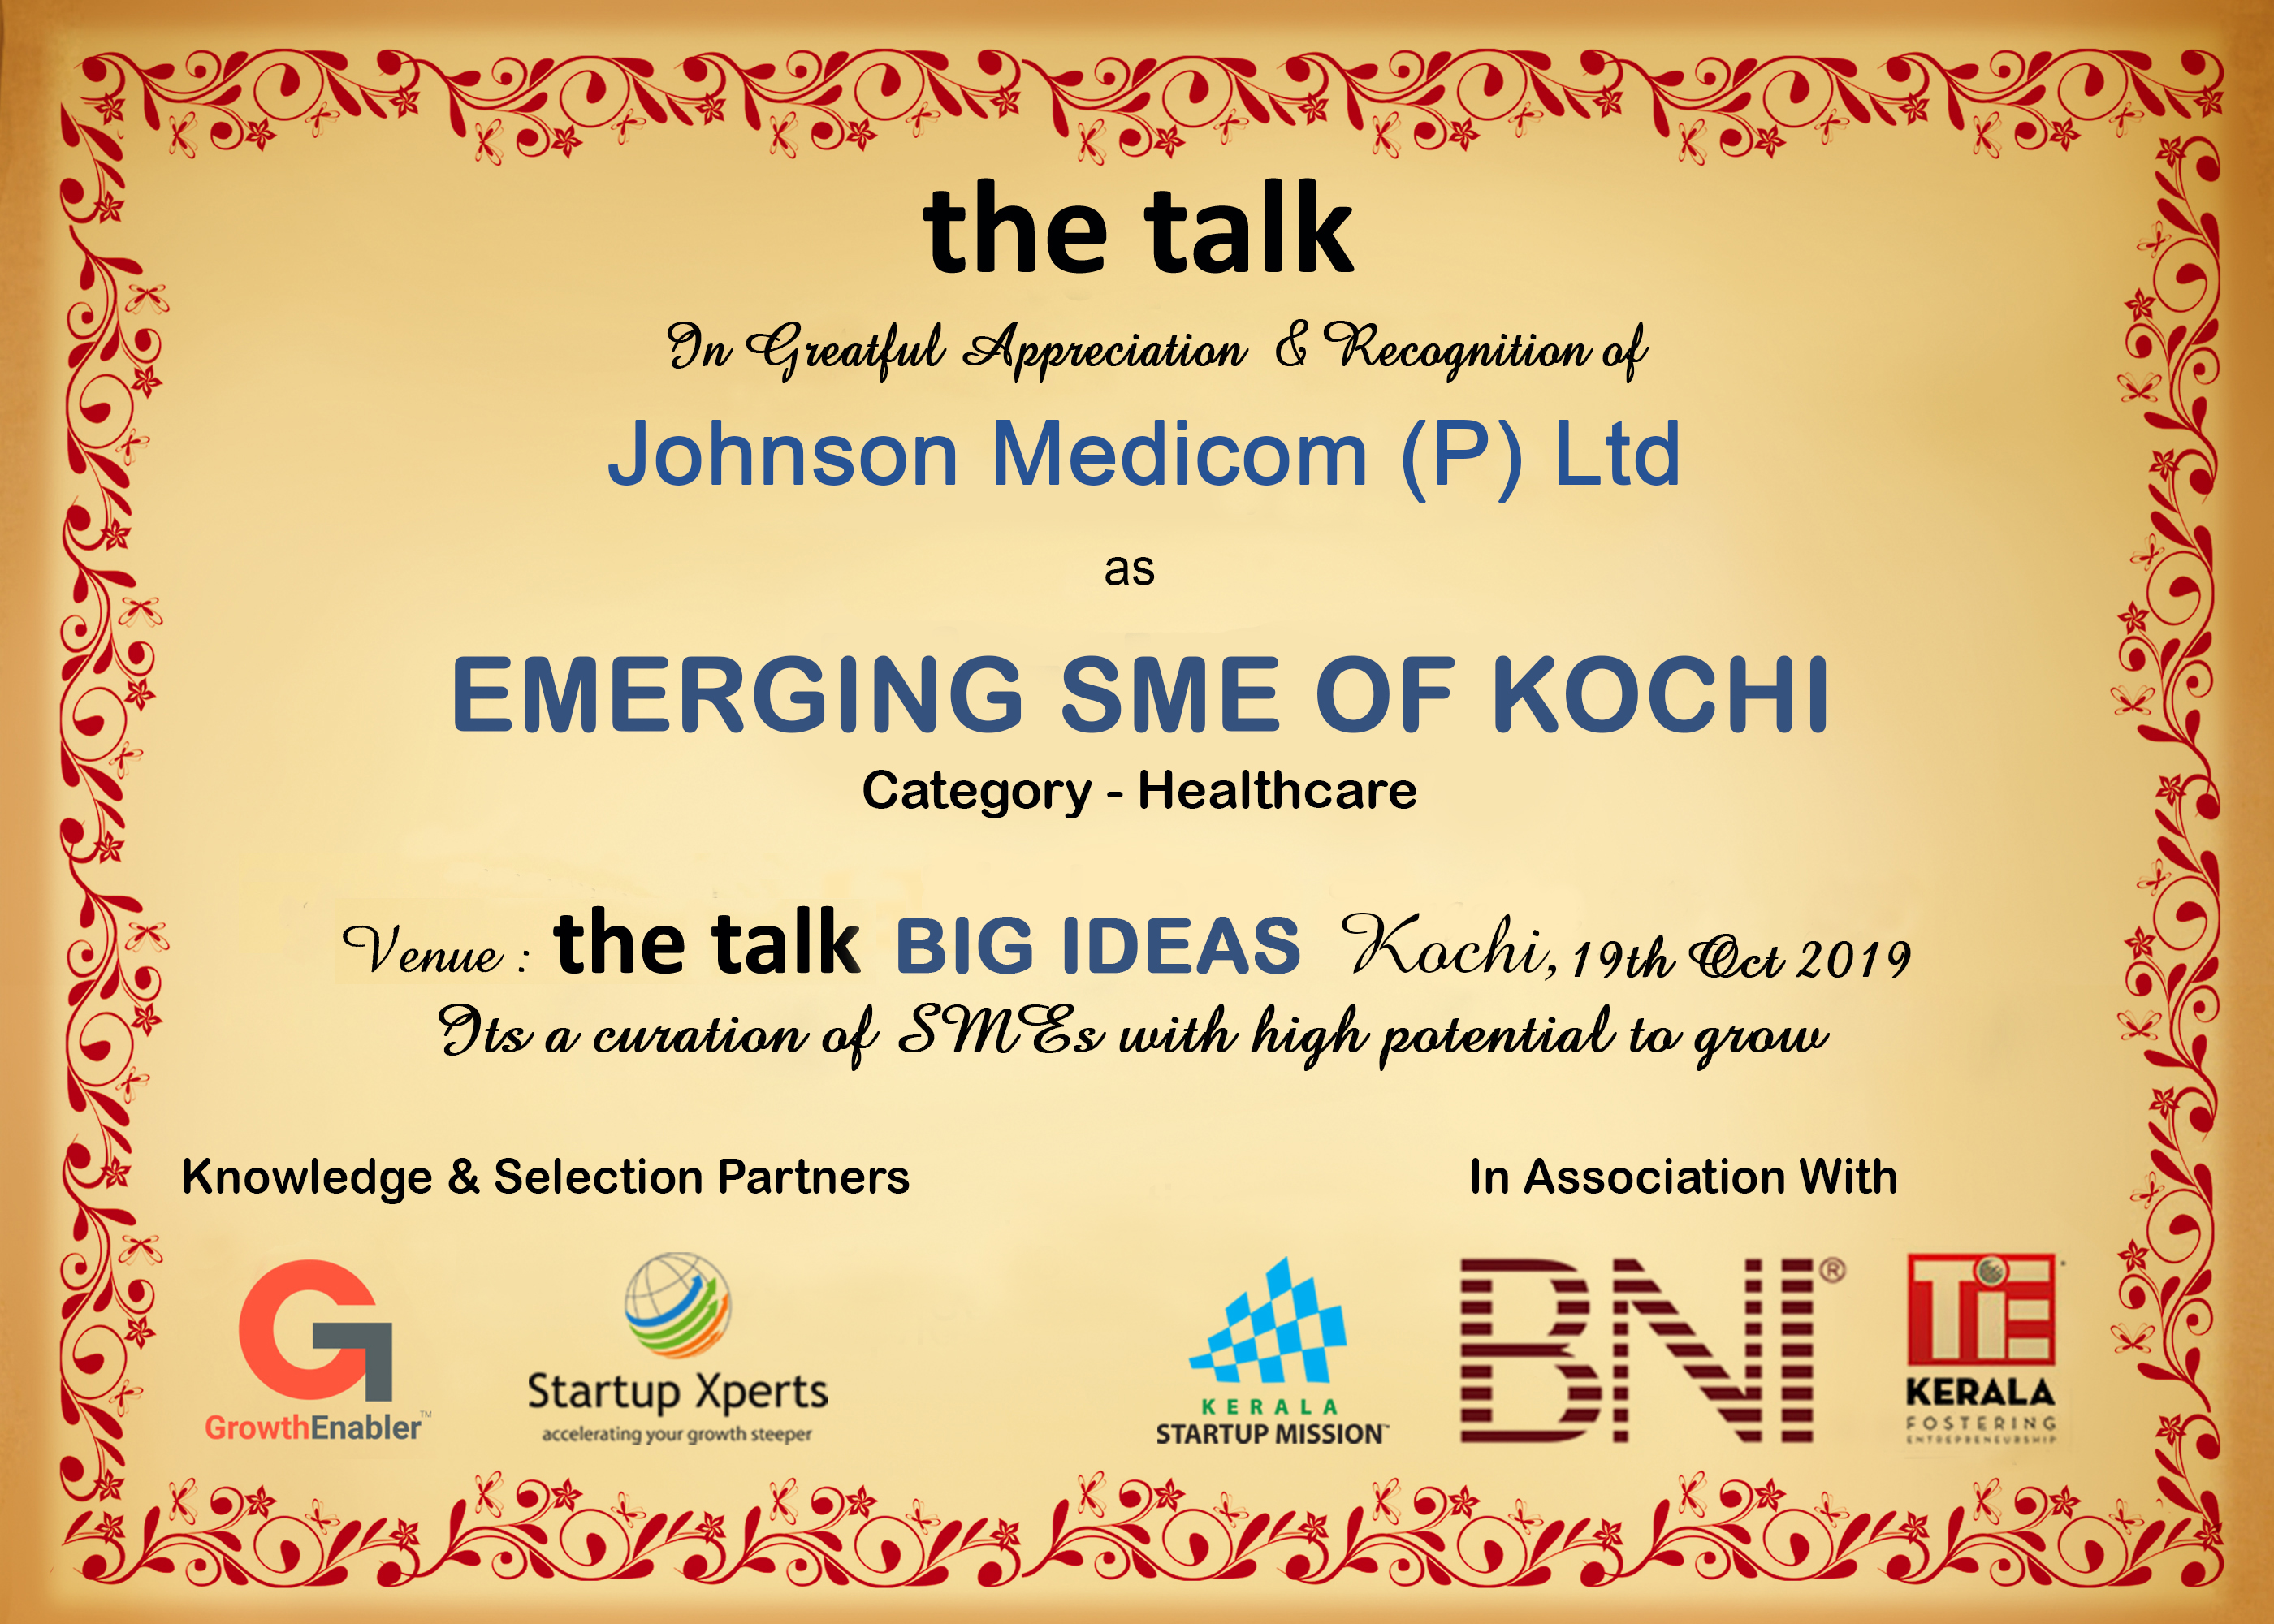 the talk - Big Ideas To Scale SME's And Startups The Westin, Hyderabad - 06th March 2019